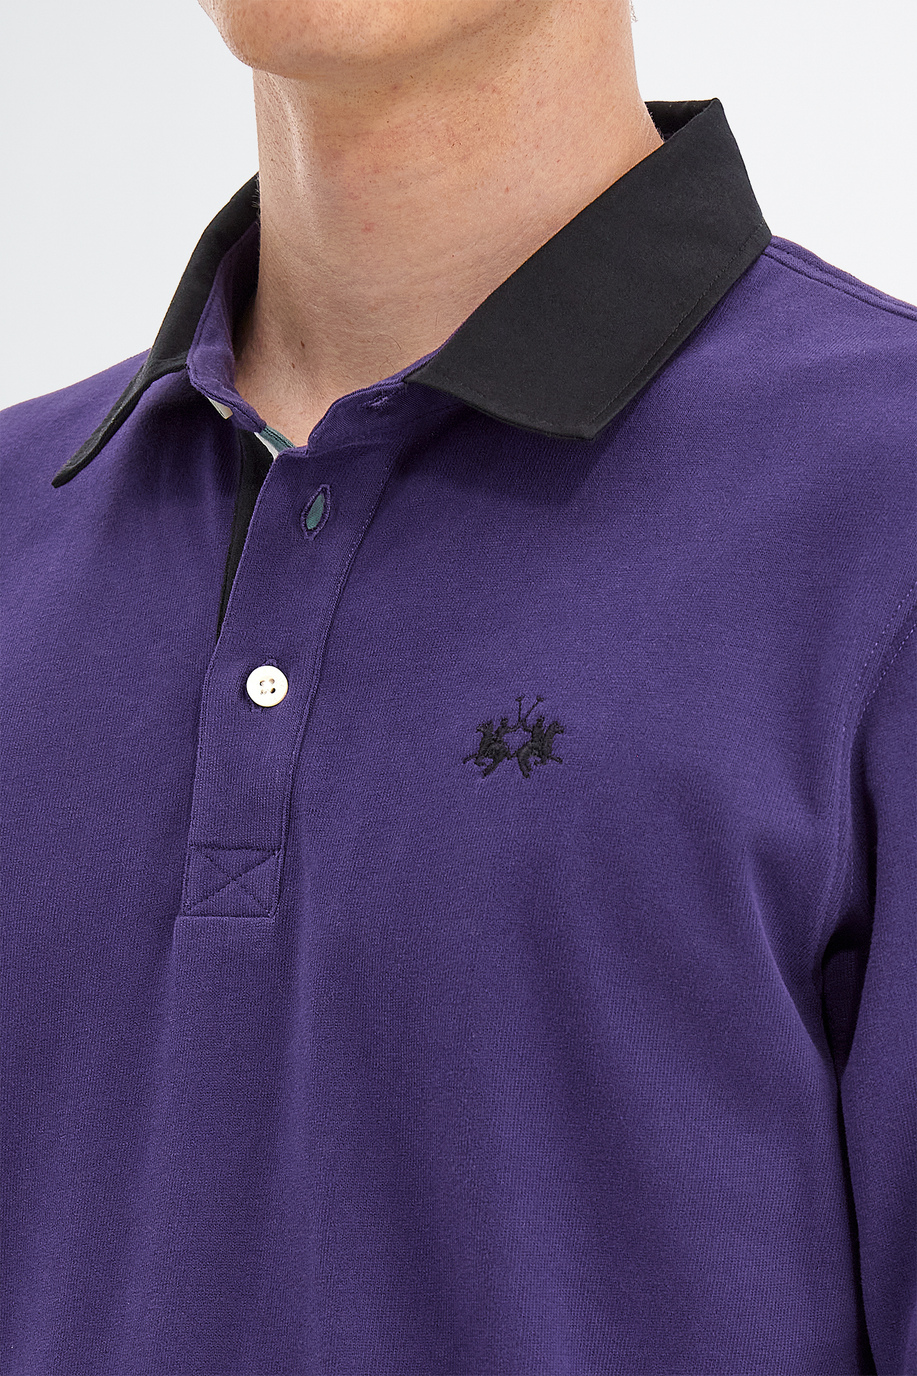 Men’s polo shirt with long sleeves in regular fit jersey cotton - Gifts under €150 for him | La Martina - Official Online Shop